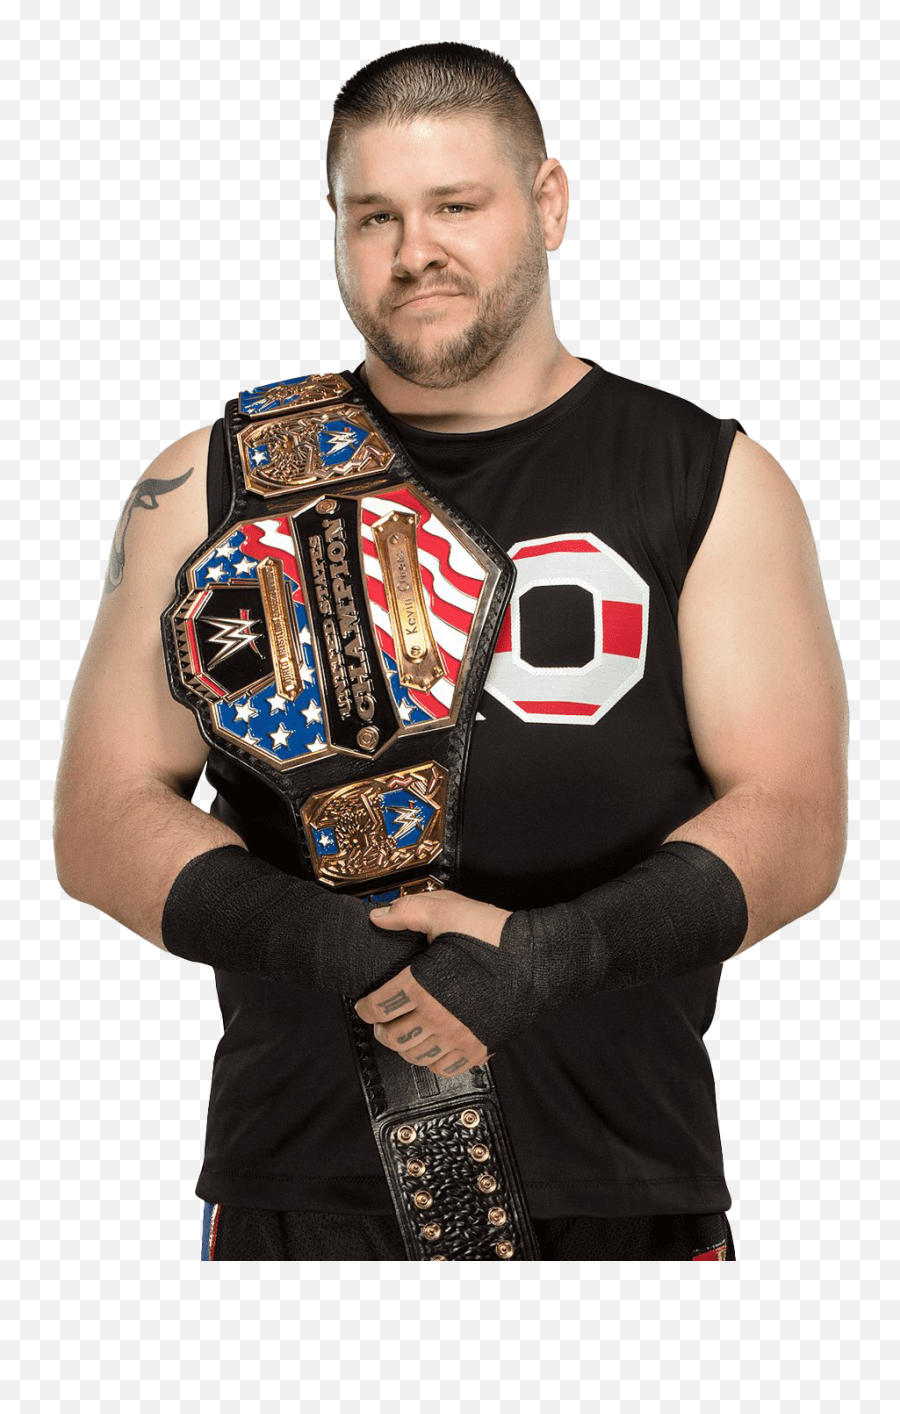 Kevin Owens Png Photo - Kevin Owens United States Champion,Kevin Owens Png